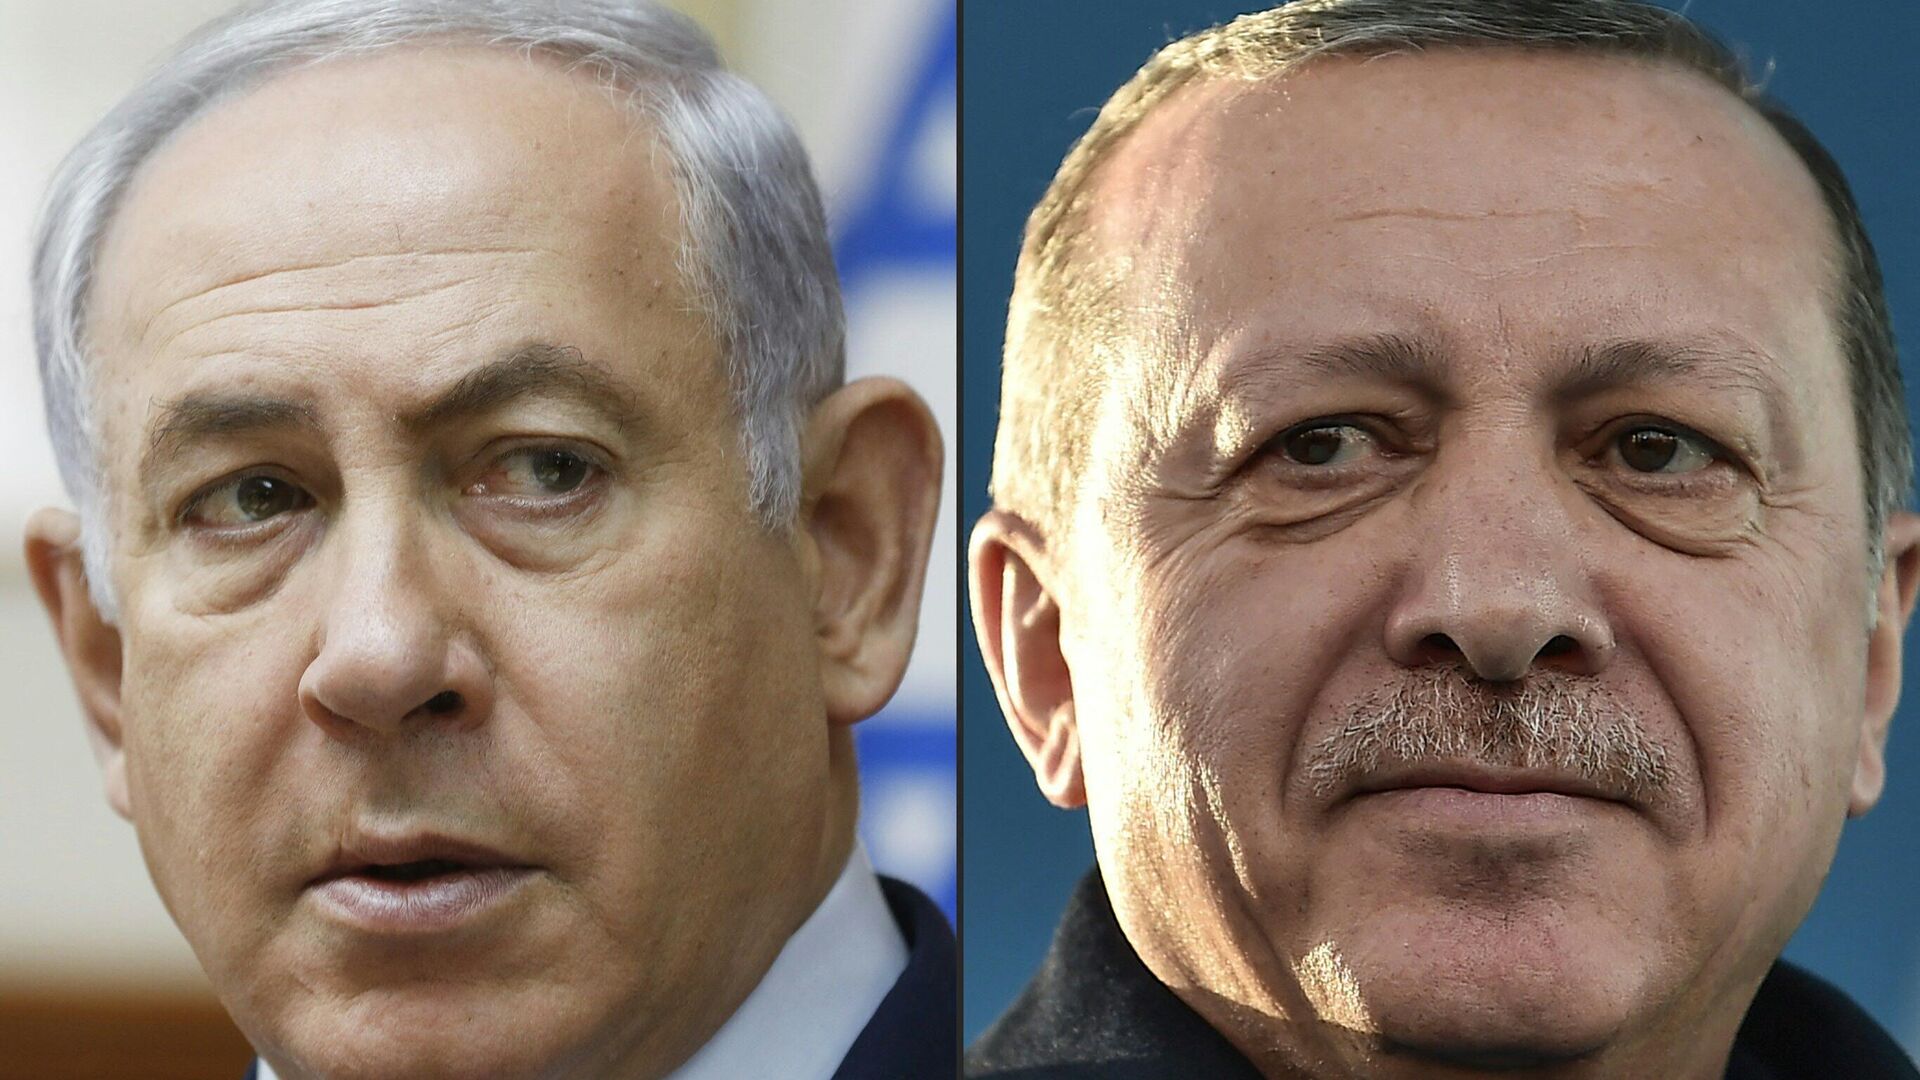 Some western countries say Netanyahu's 'end' is near -